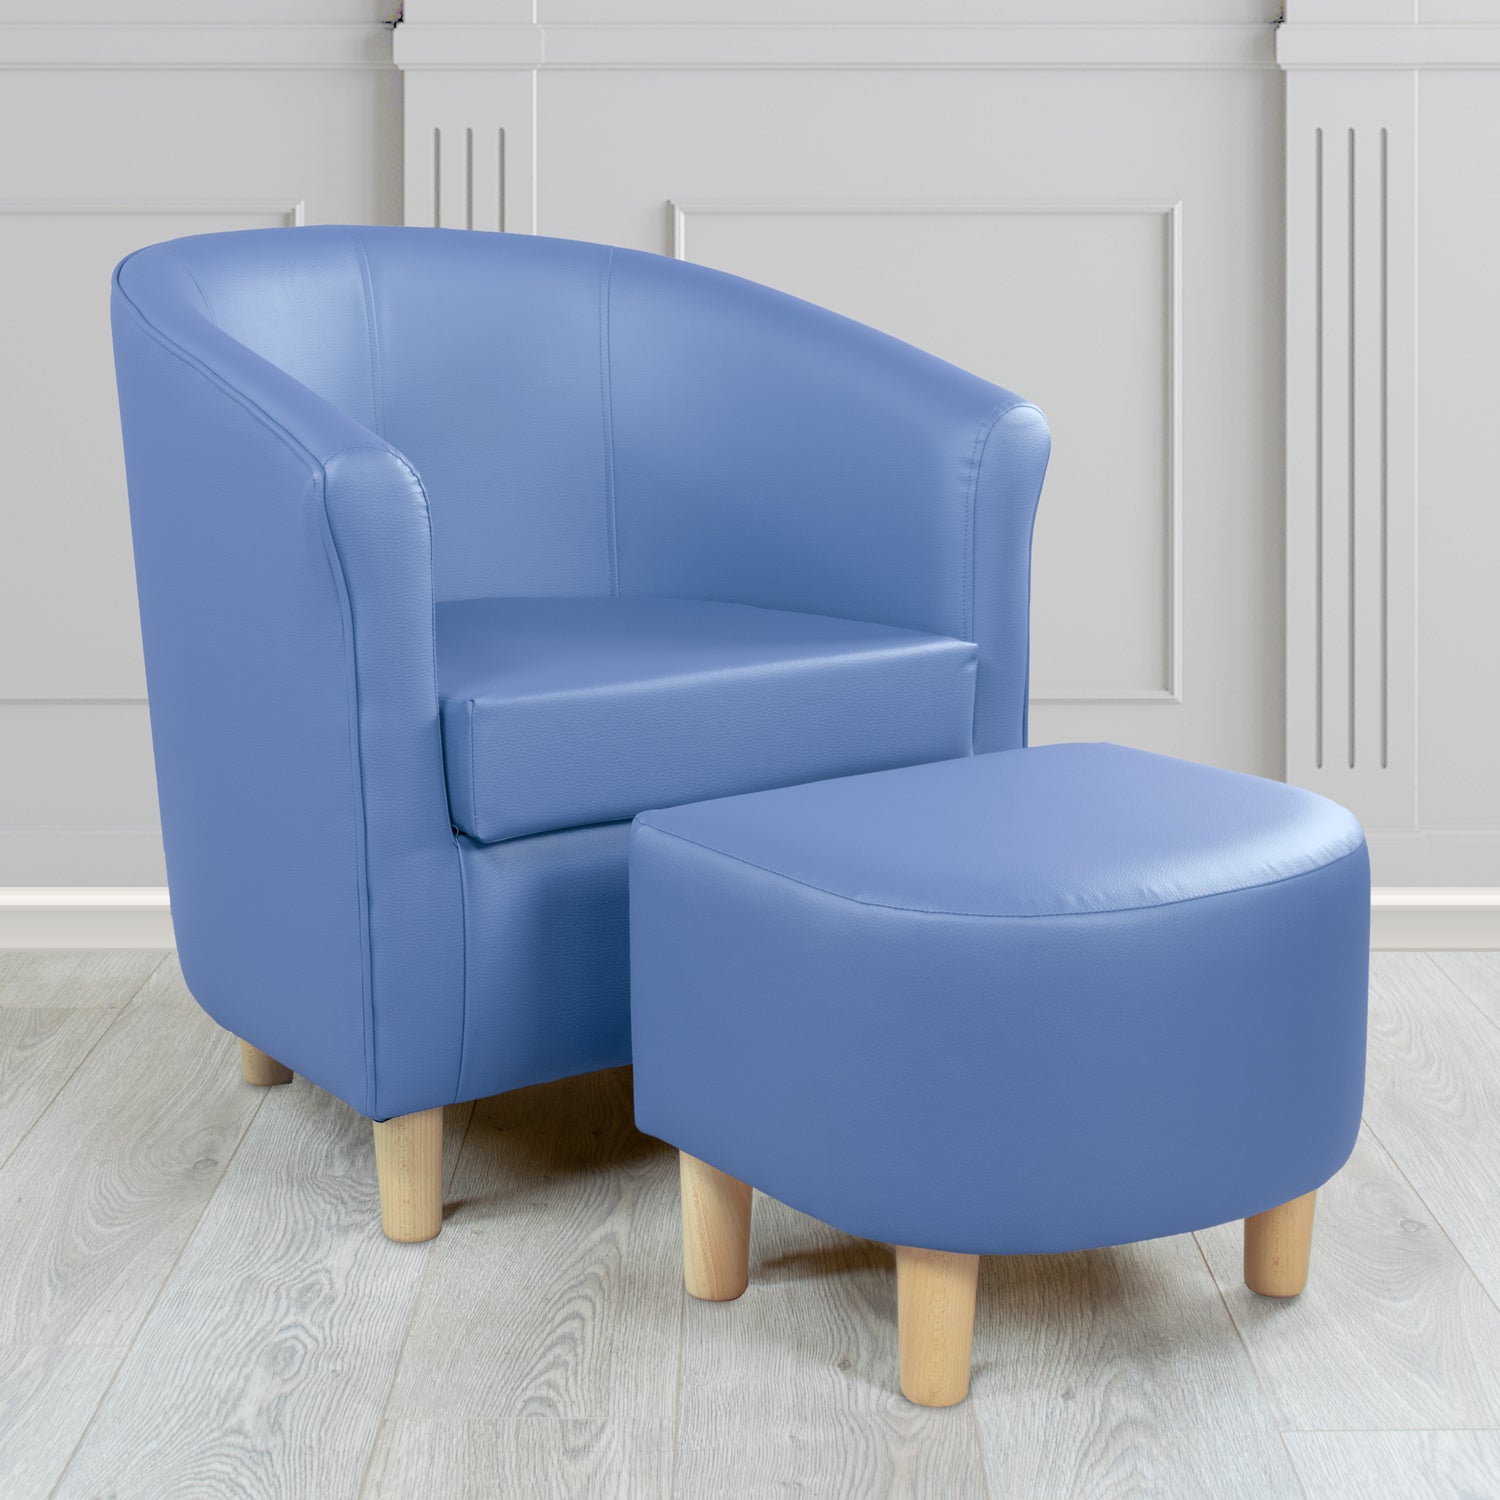 Tuscany Just Colour Blue Steel Faux Leather Tub Chair with Dee Footstool Set - The Tub Chair Shop